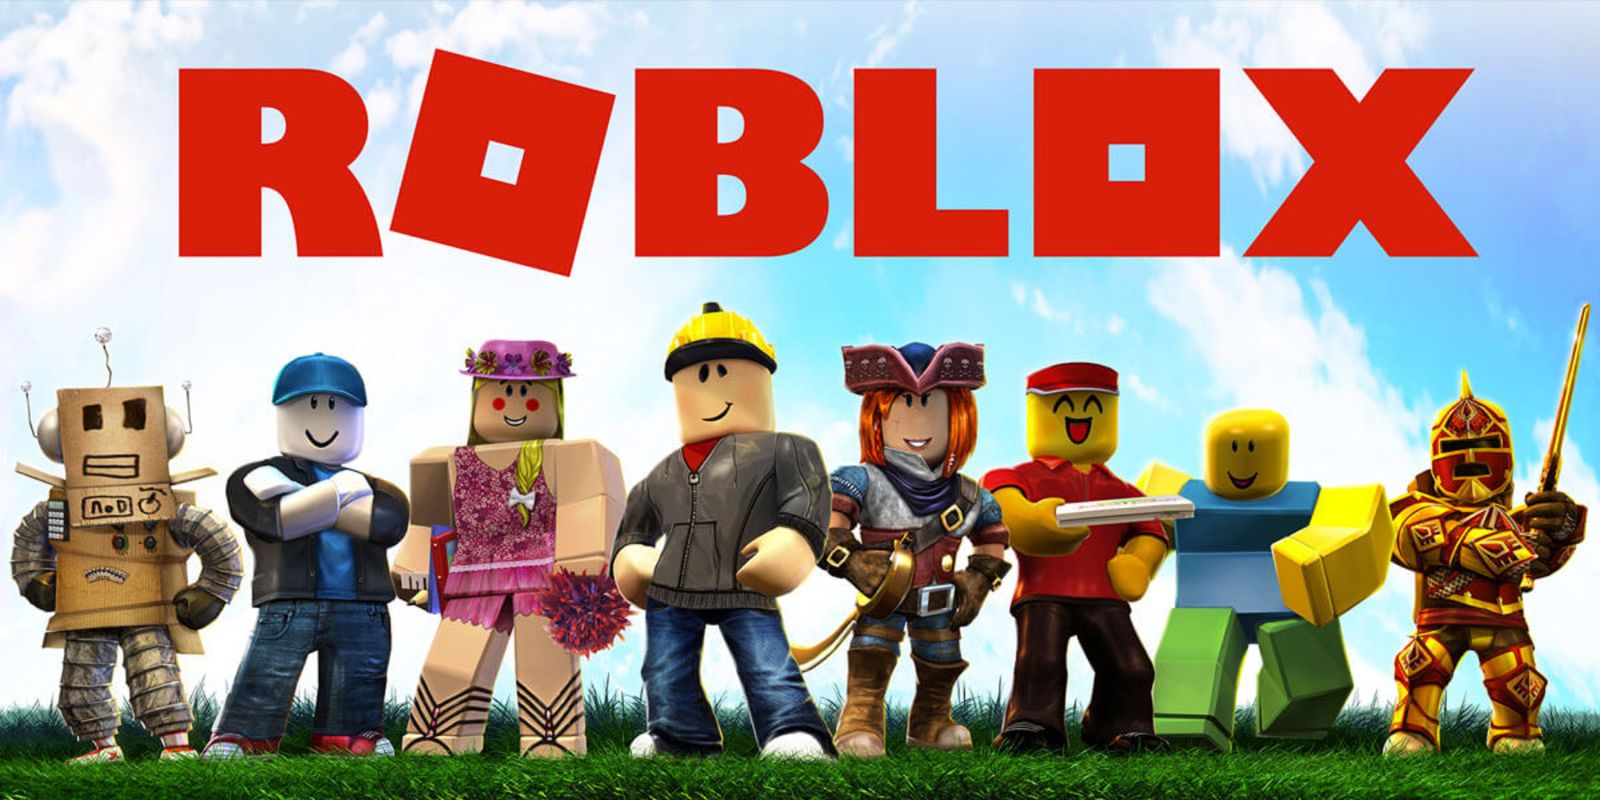 Roblox logo in red in front of a blue sky and above a group of Roblox characters.